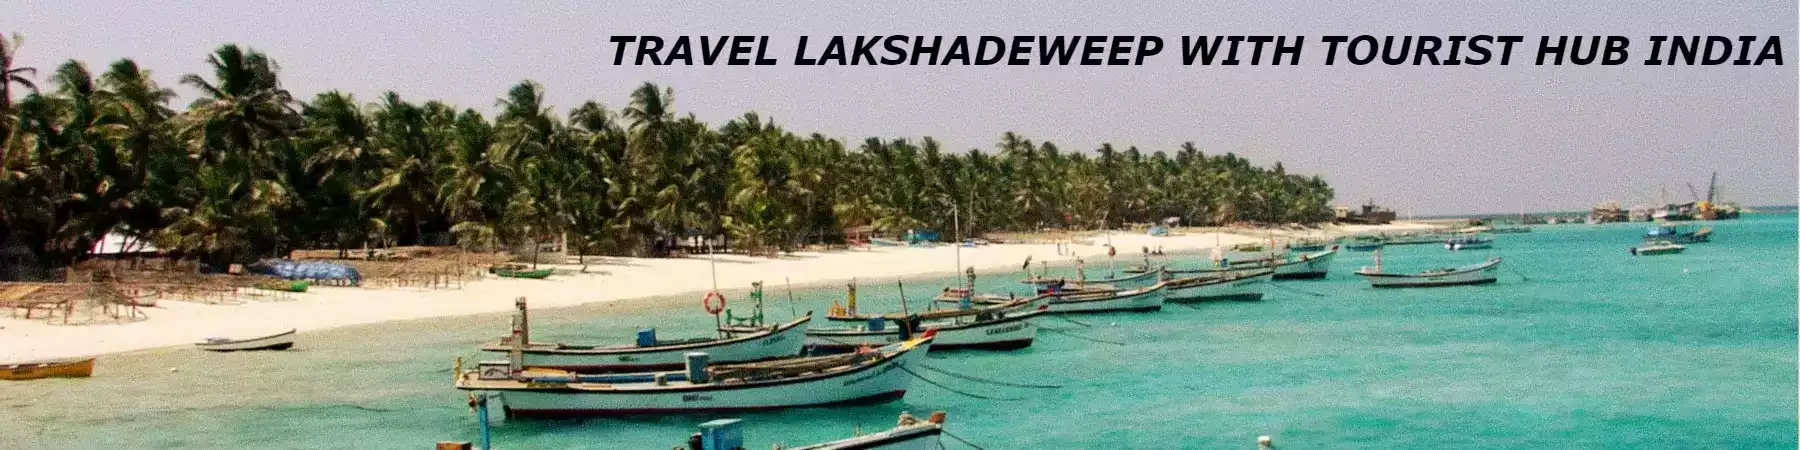 Lakshadweep package tour by flight with Tourist Hub India - The Best Lakshadweep Travel Agency